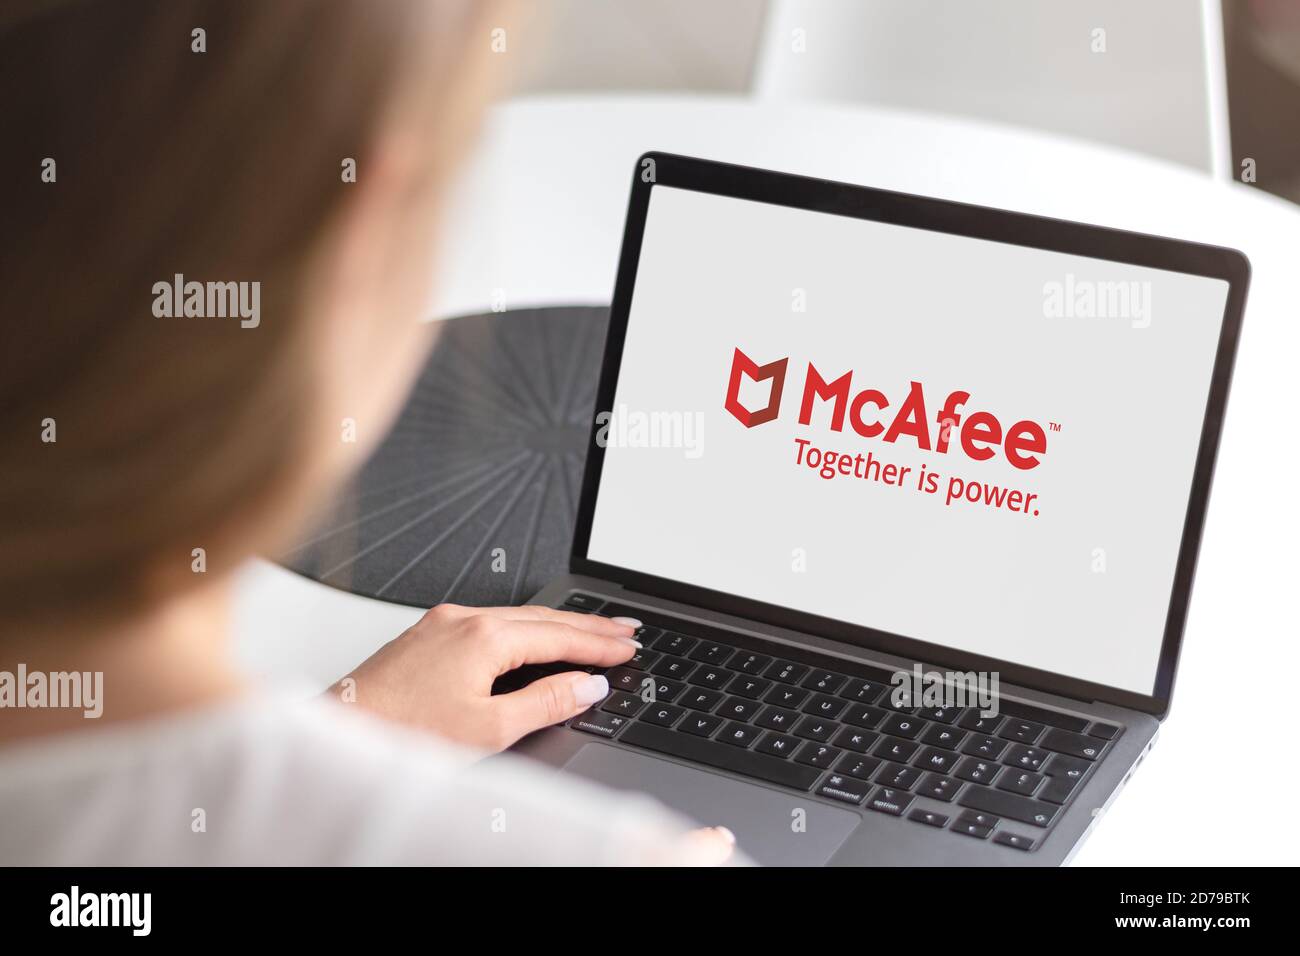 Guilherand-Granges, France - October 21, 2020. Notebook with McAfee logo. American global computer security software company. Stock Photo